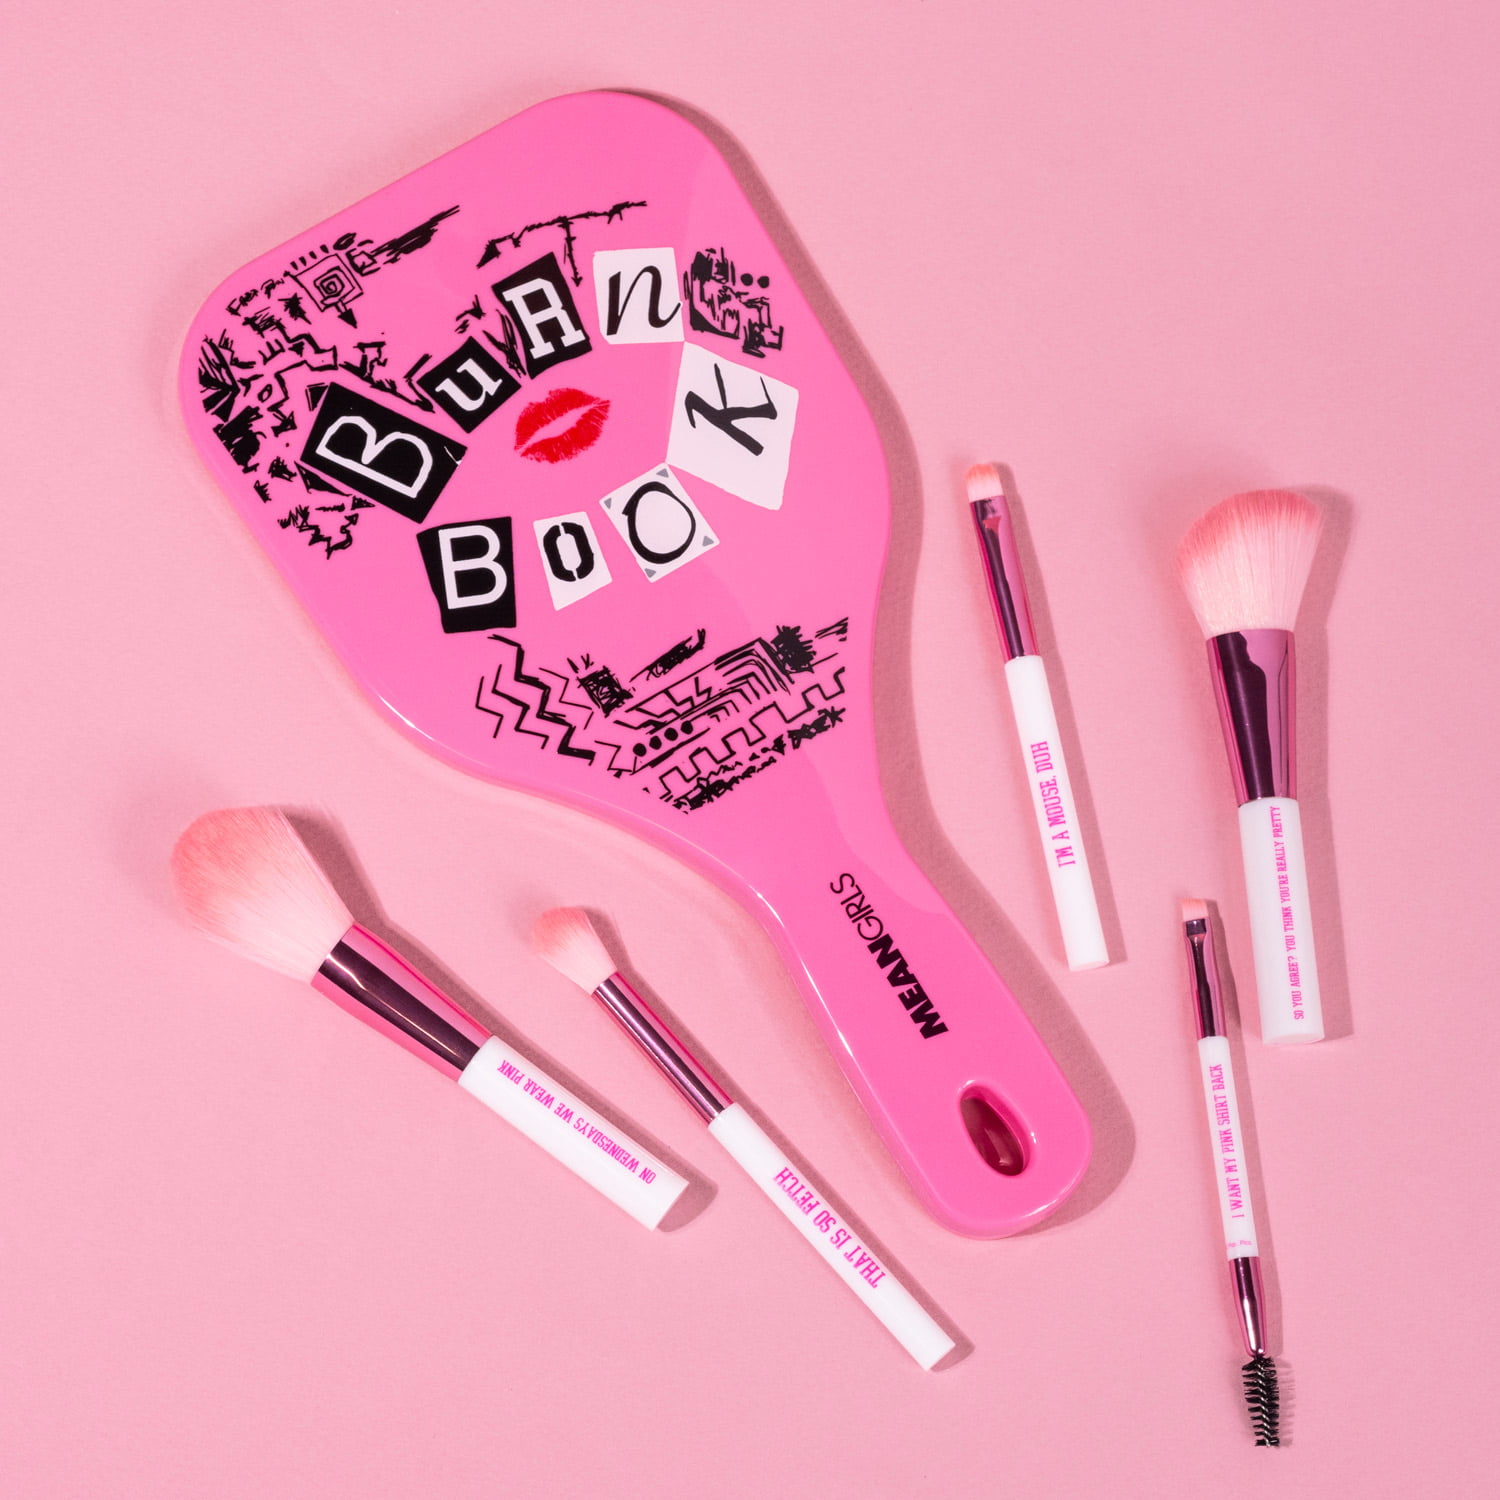 5 Makeup Products That Remind Us of Mean Girls